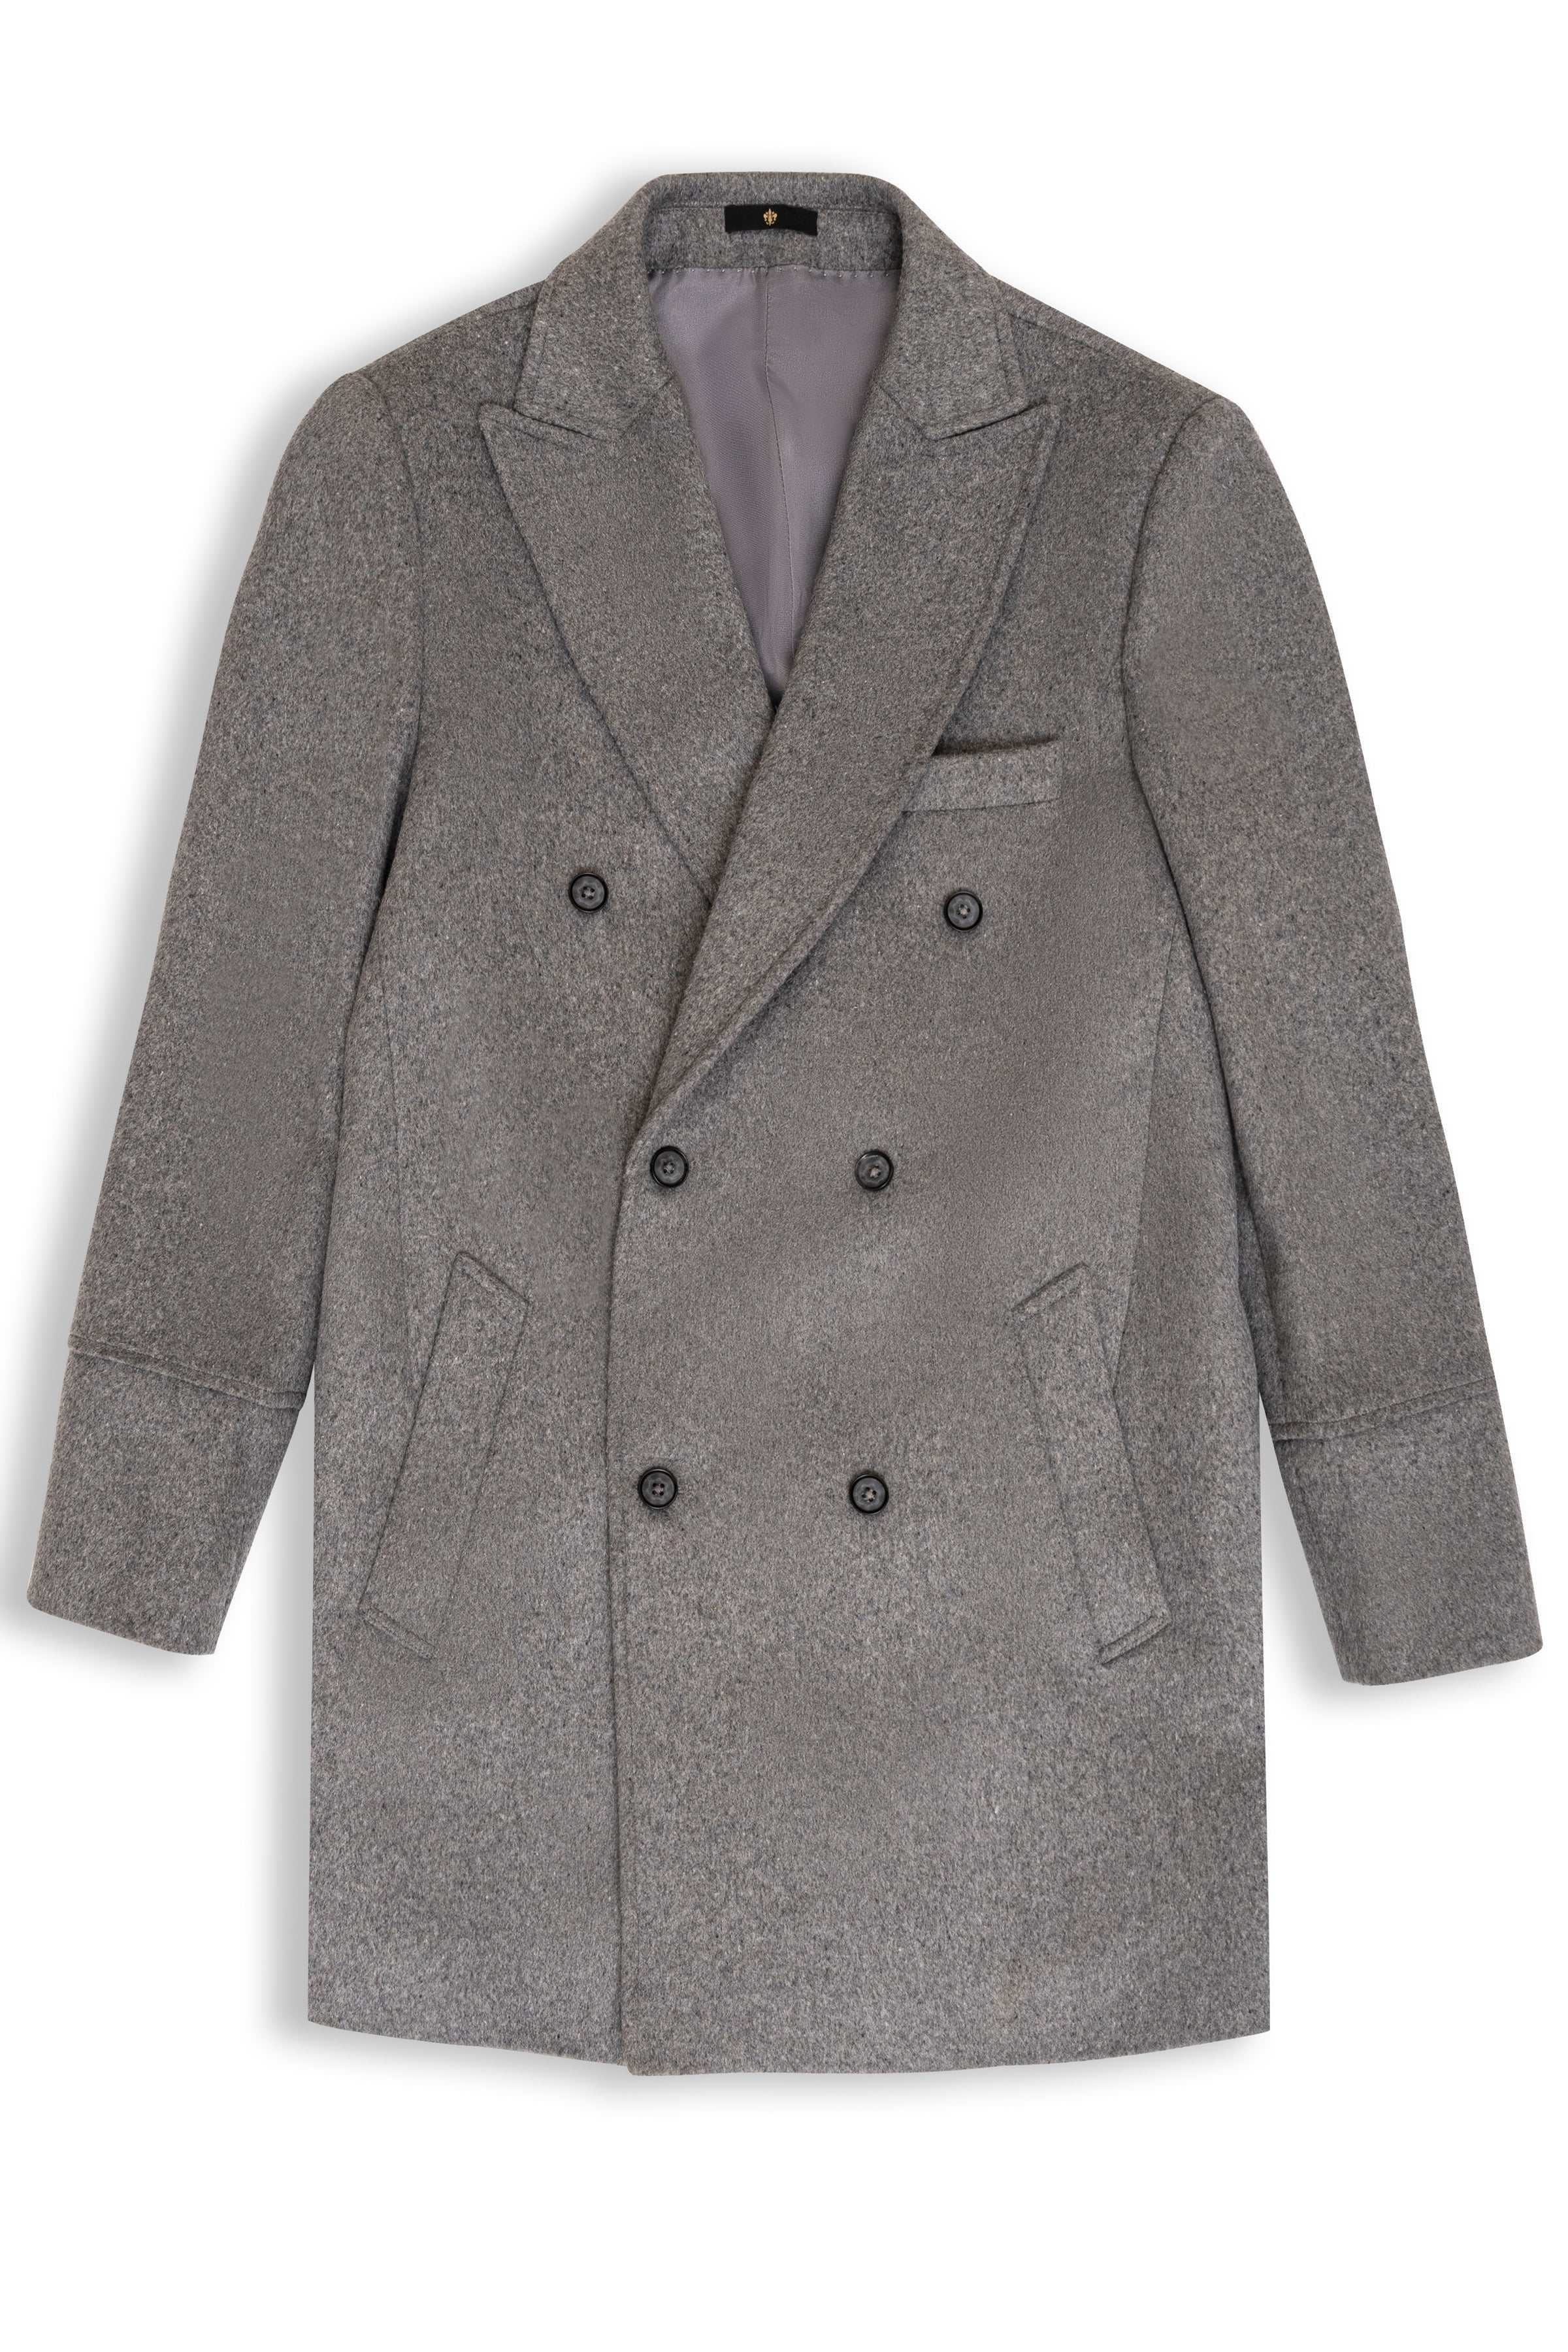 WOOLEN LONG COAT DOUBLE BREASTED LIGHT DARK GREY at Charcoal Clothing